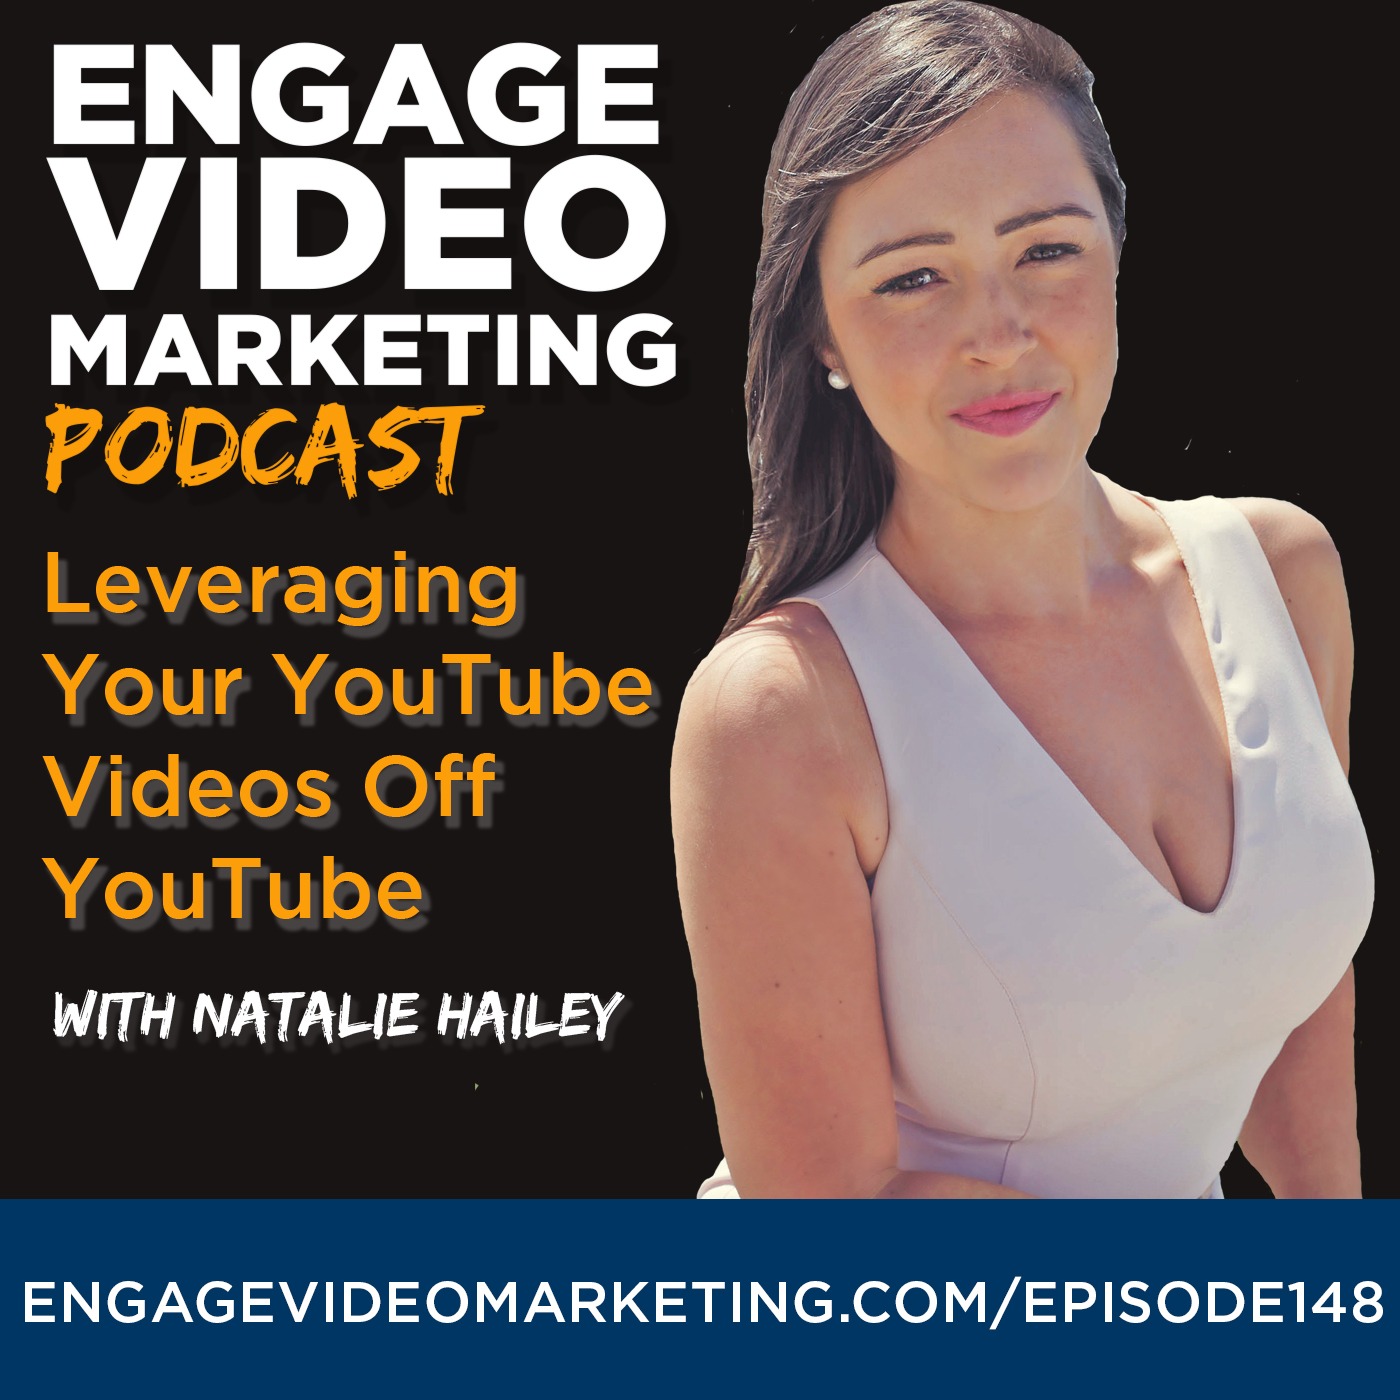 Leveraging Your YouTube Videos Off YouTube with Natalie Hailey